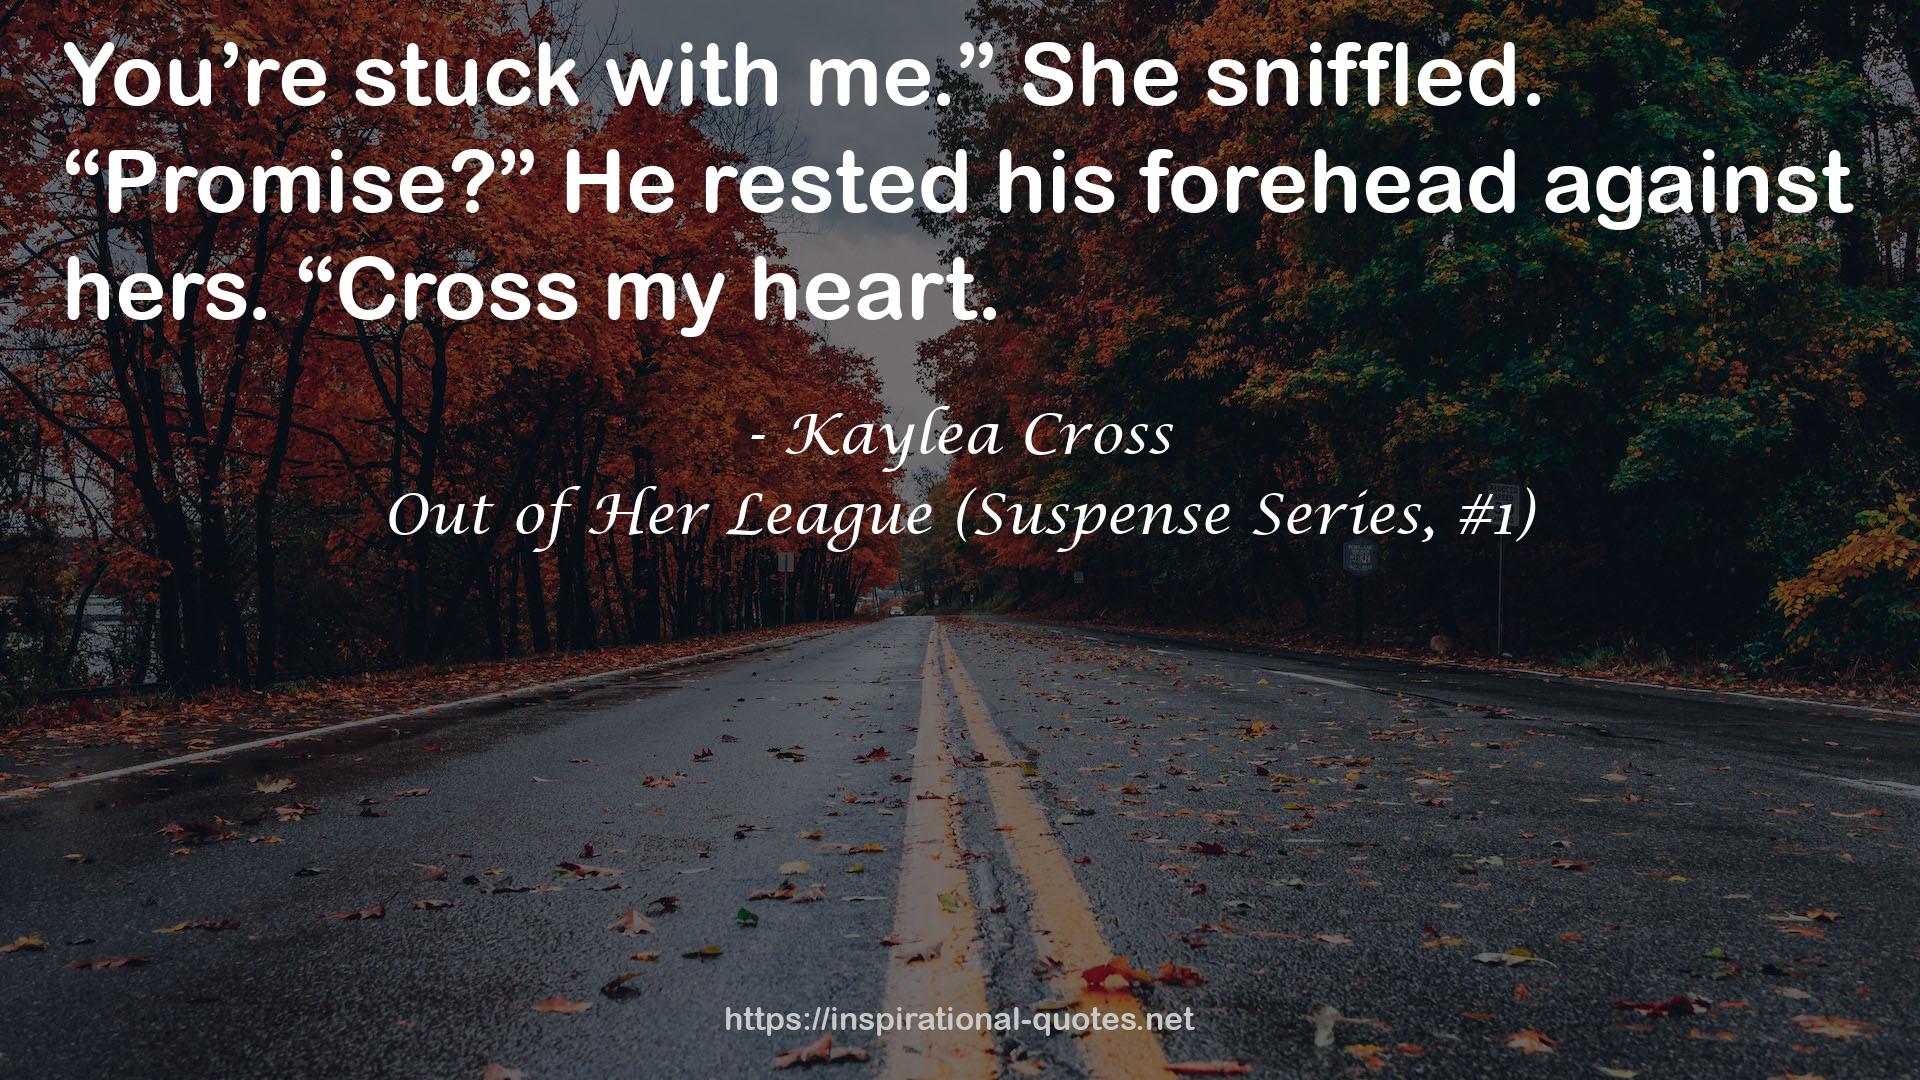 Out of Her League (Suspense Series, #1) QUOTES